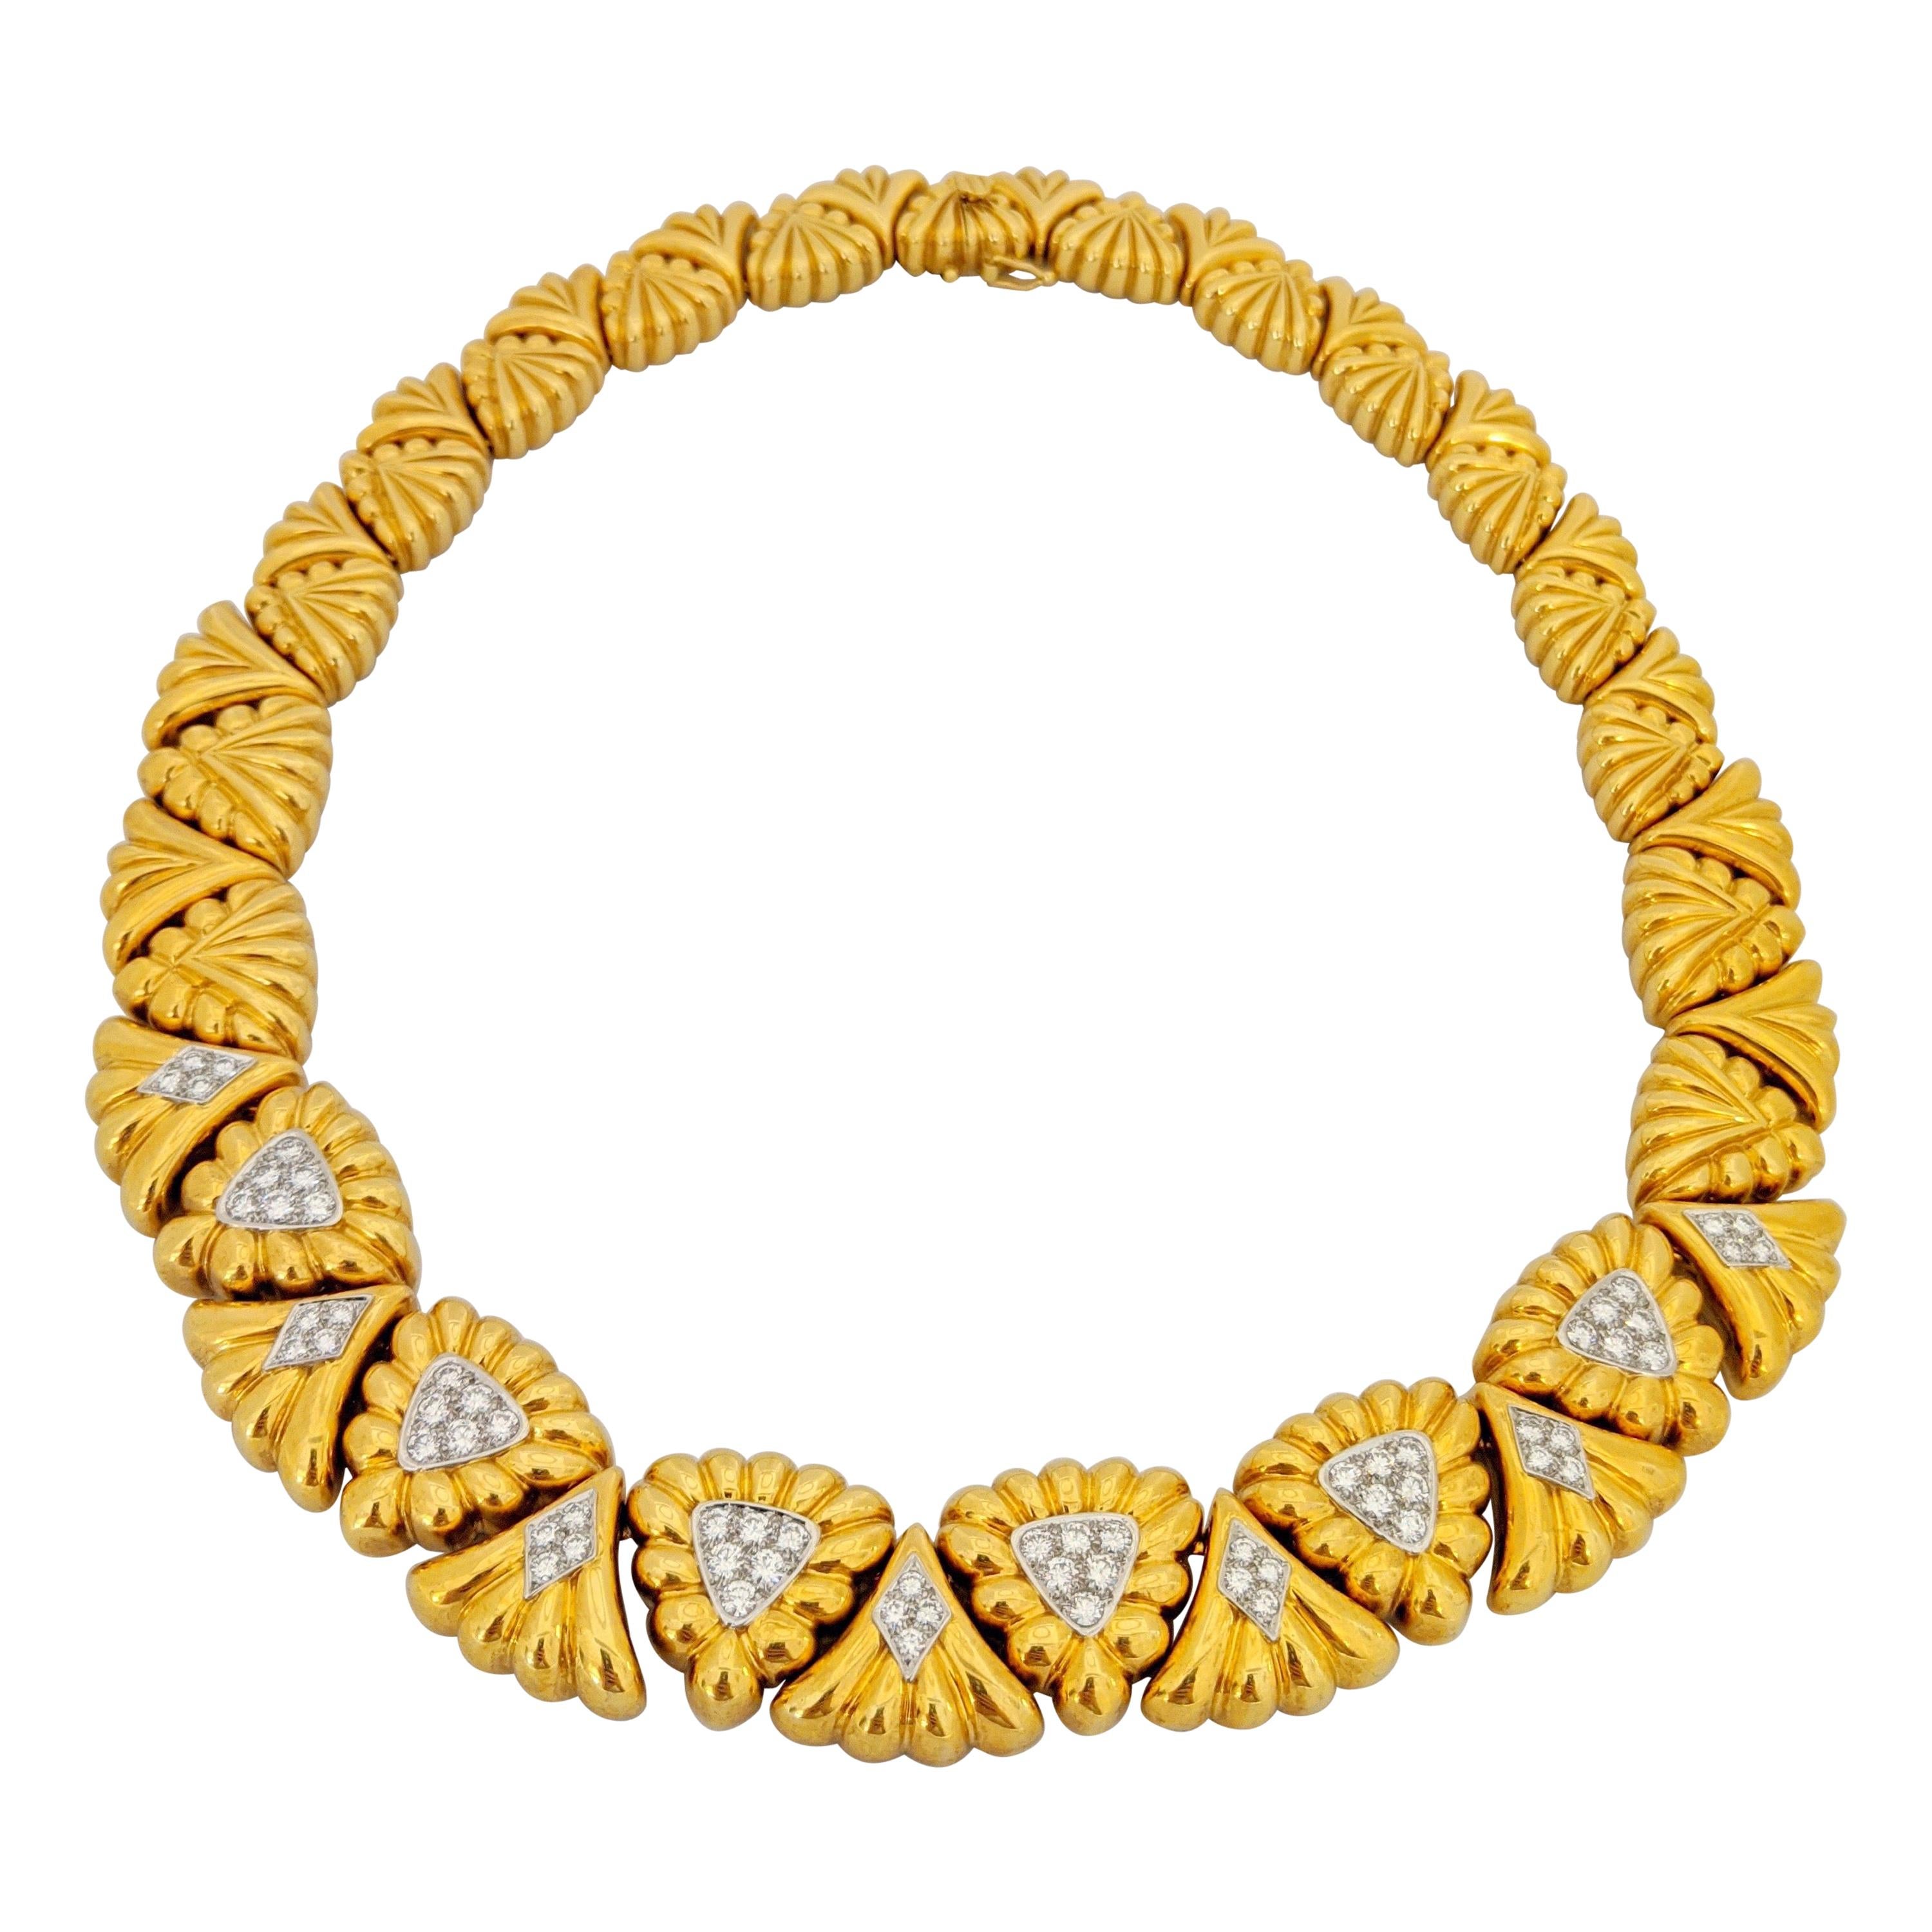 Chaavae Platinum and 18 Karat Yellow Gold and 2.92 Carat Diamond Collar Necklace For Sale